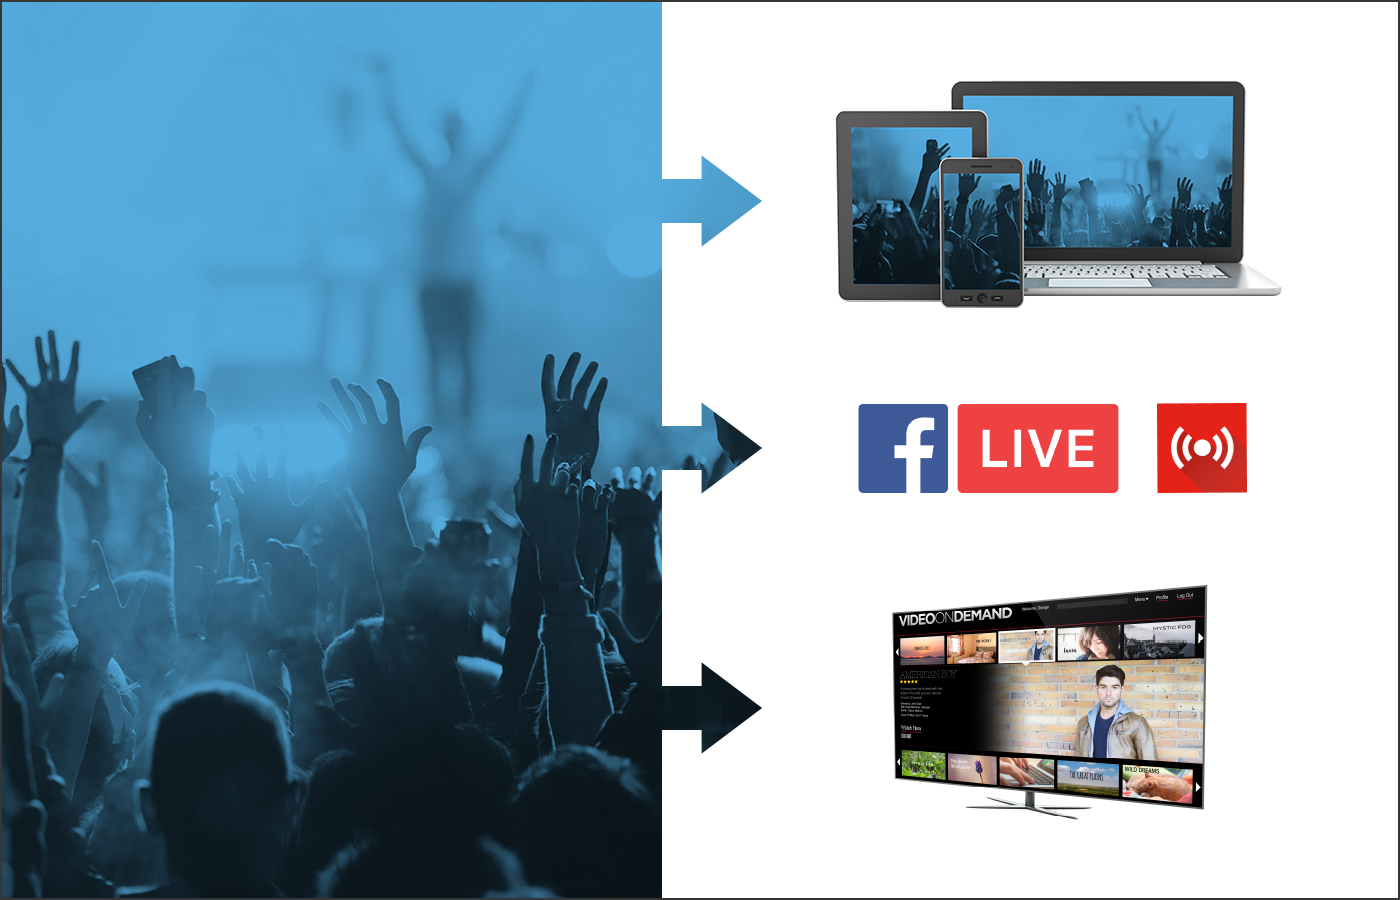 Telestream Announces Latest Version of Lightspeed Live Stream for Multiscreen Live Streaming at Scale - May 15, 2017